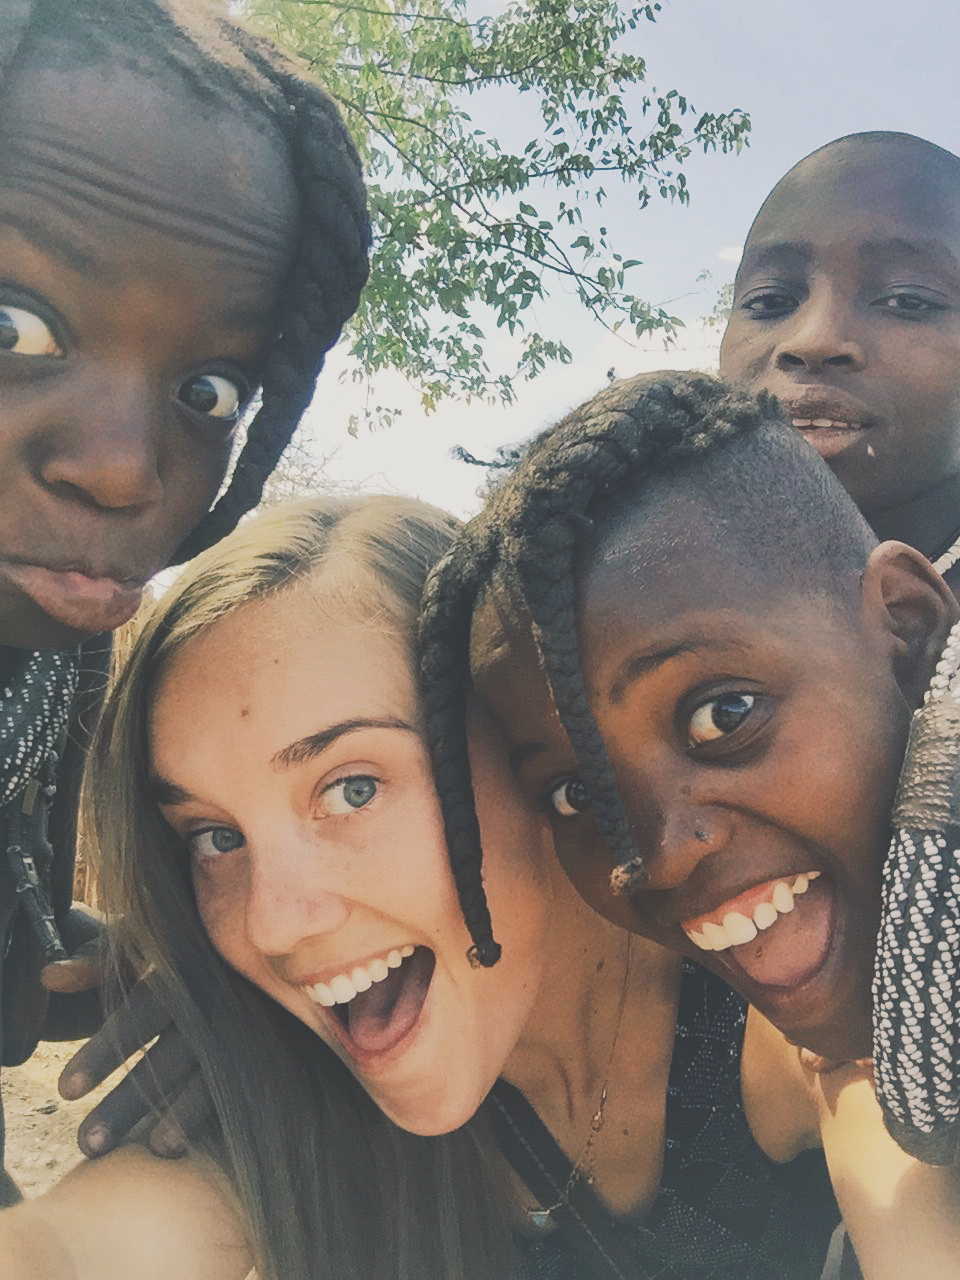 Opuwa, Namibia - Himba tribe. No matter where they're from, kids love to take goofy selfies.